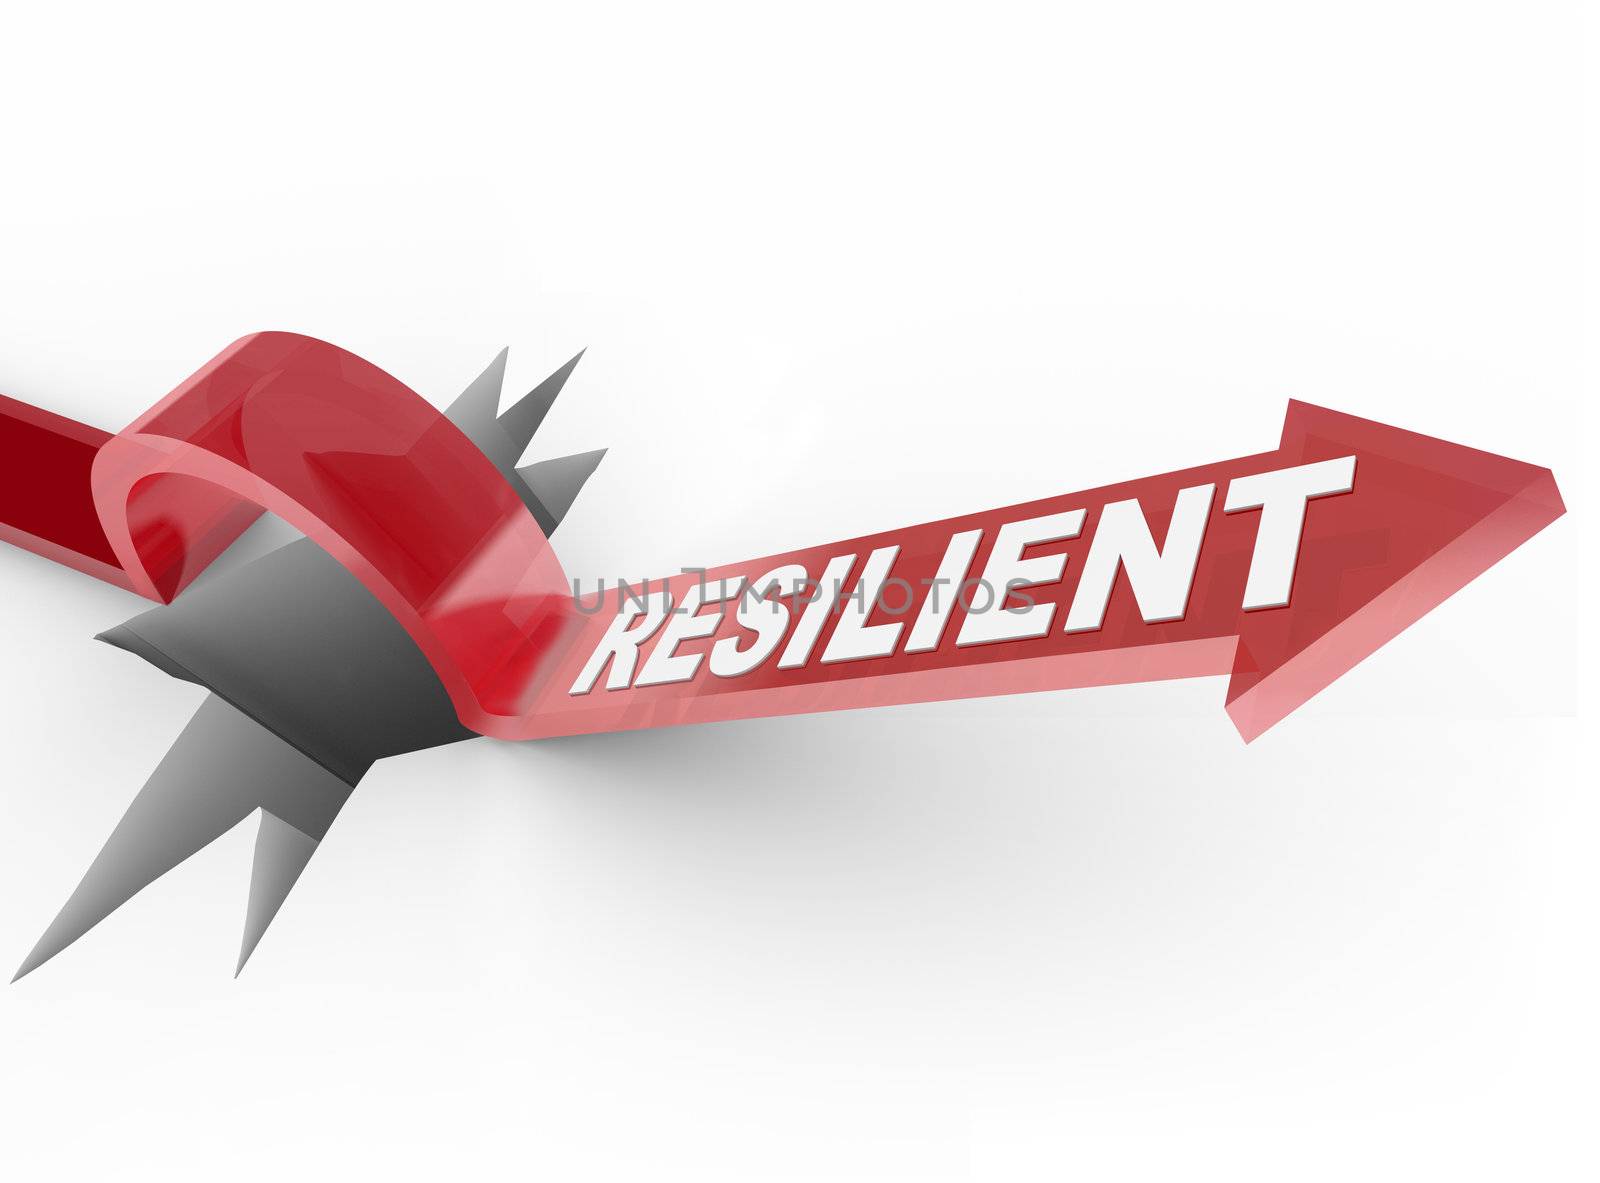 An arrow jumps over a hole, with the word Resilient to illustrate a winning attitude and determined approach to conquering a problem